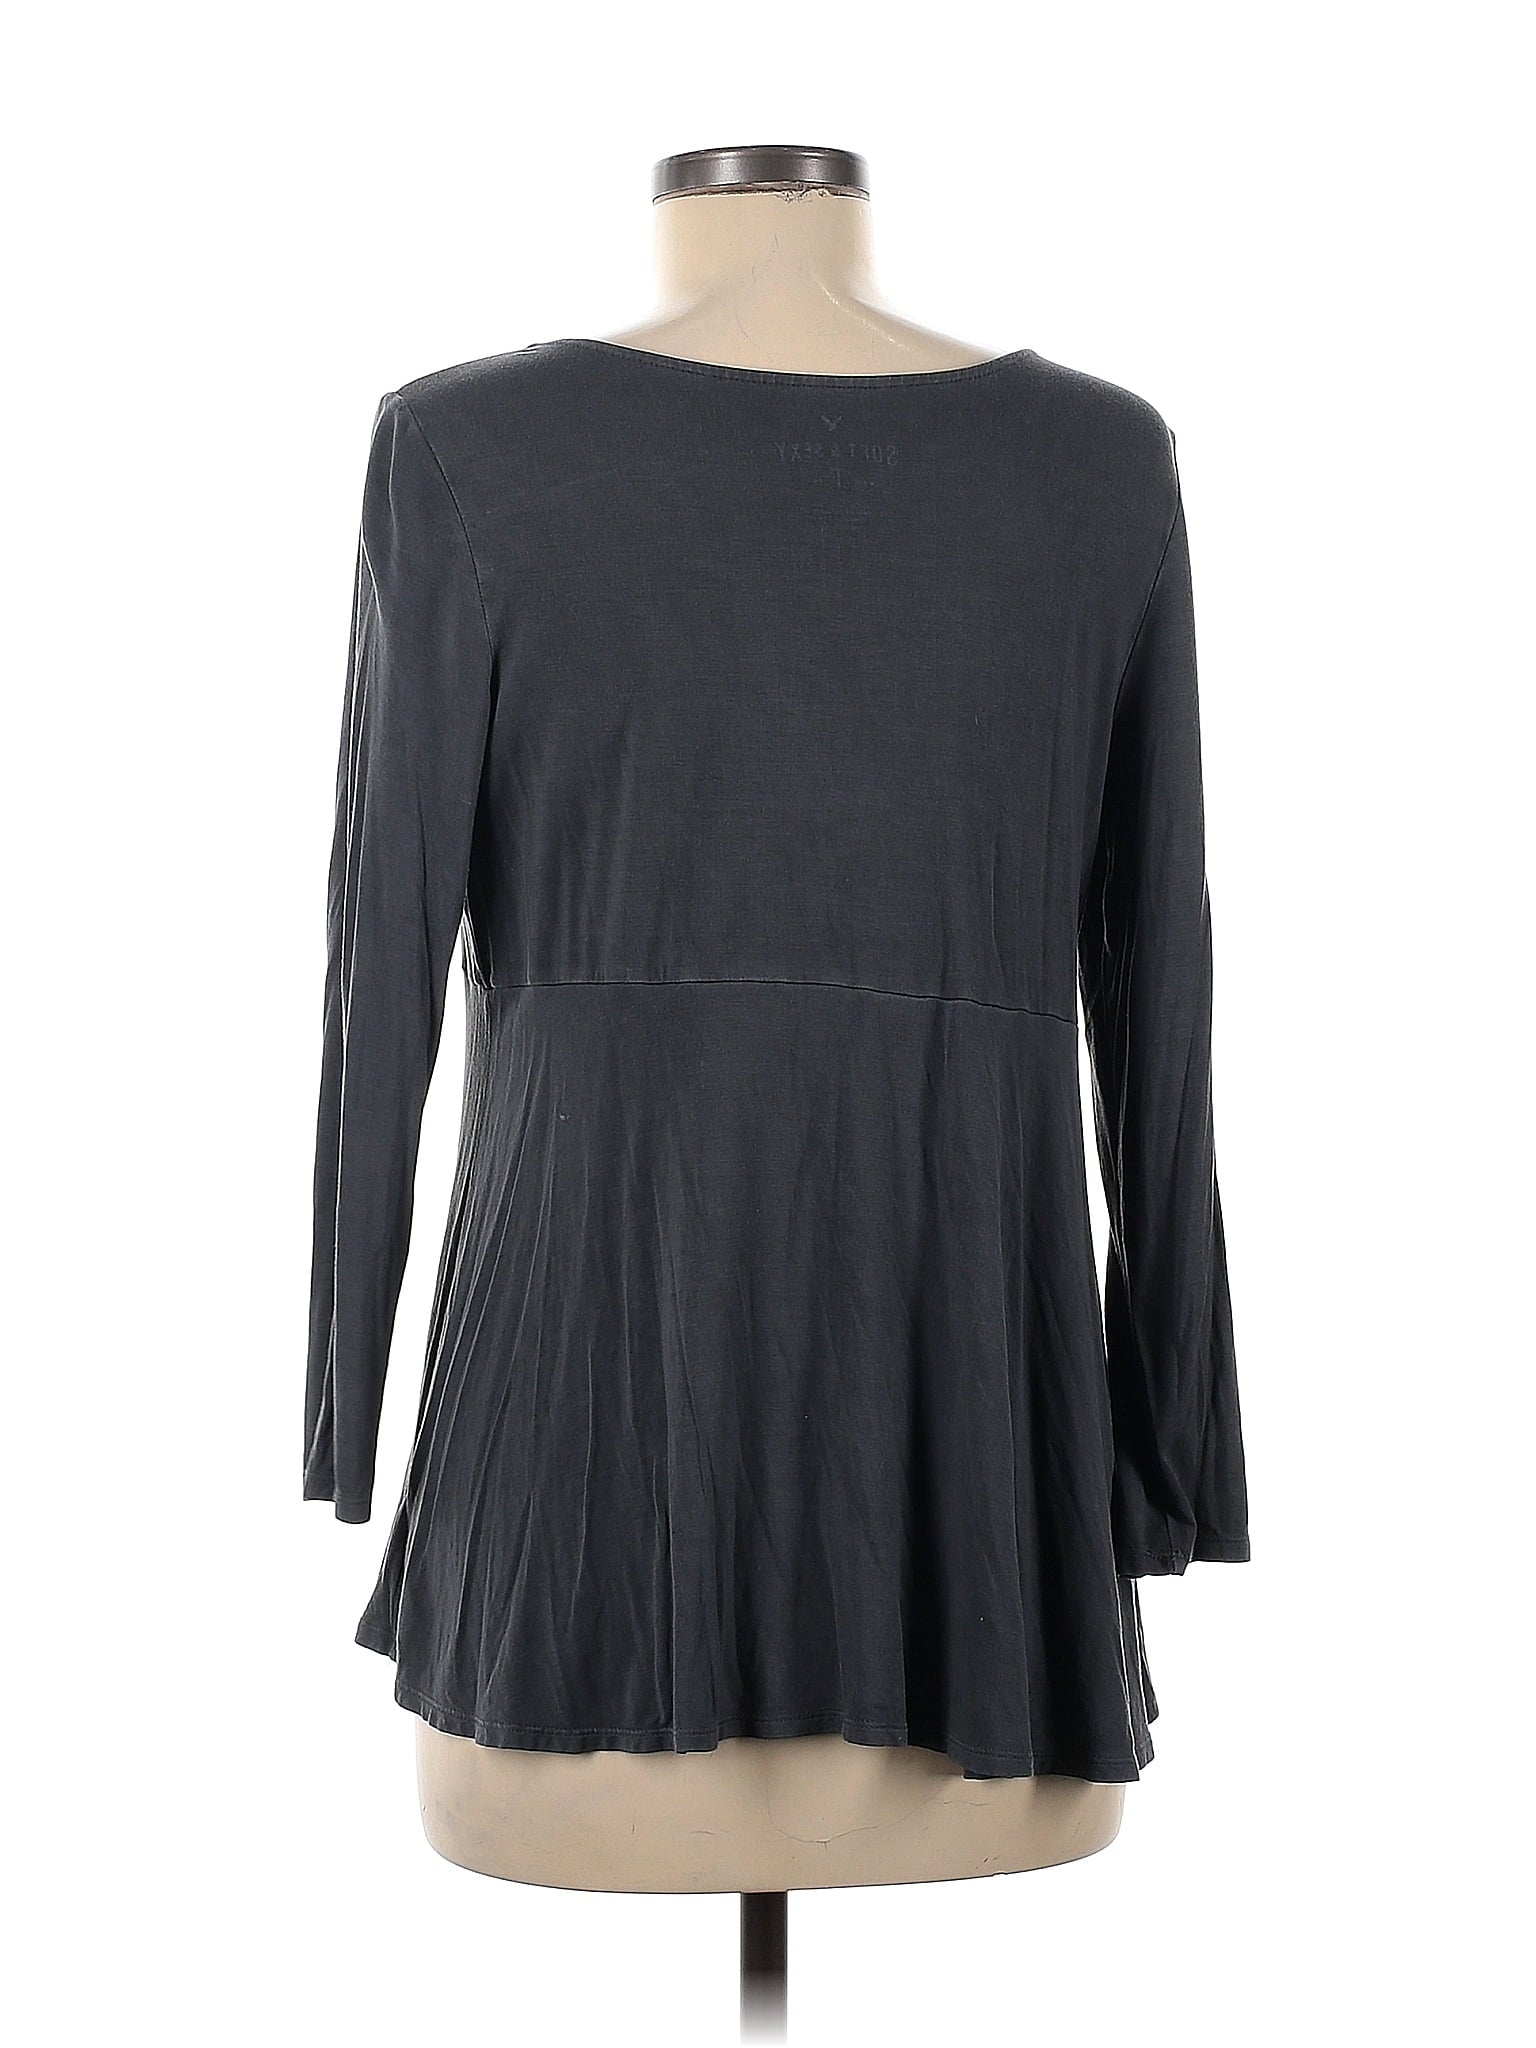 3/4 Sleeve Top size - M